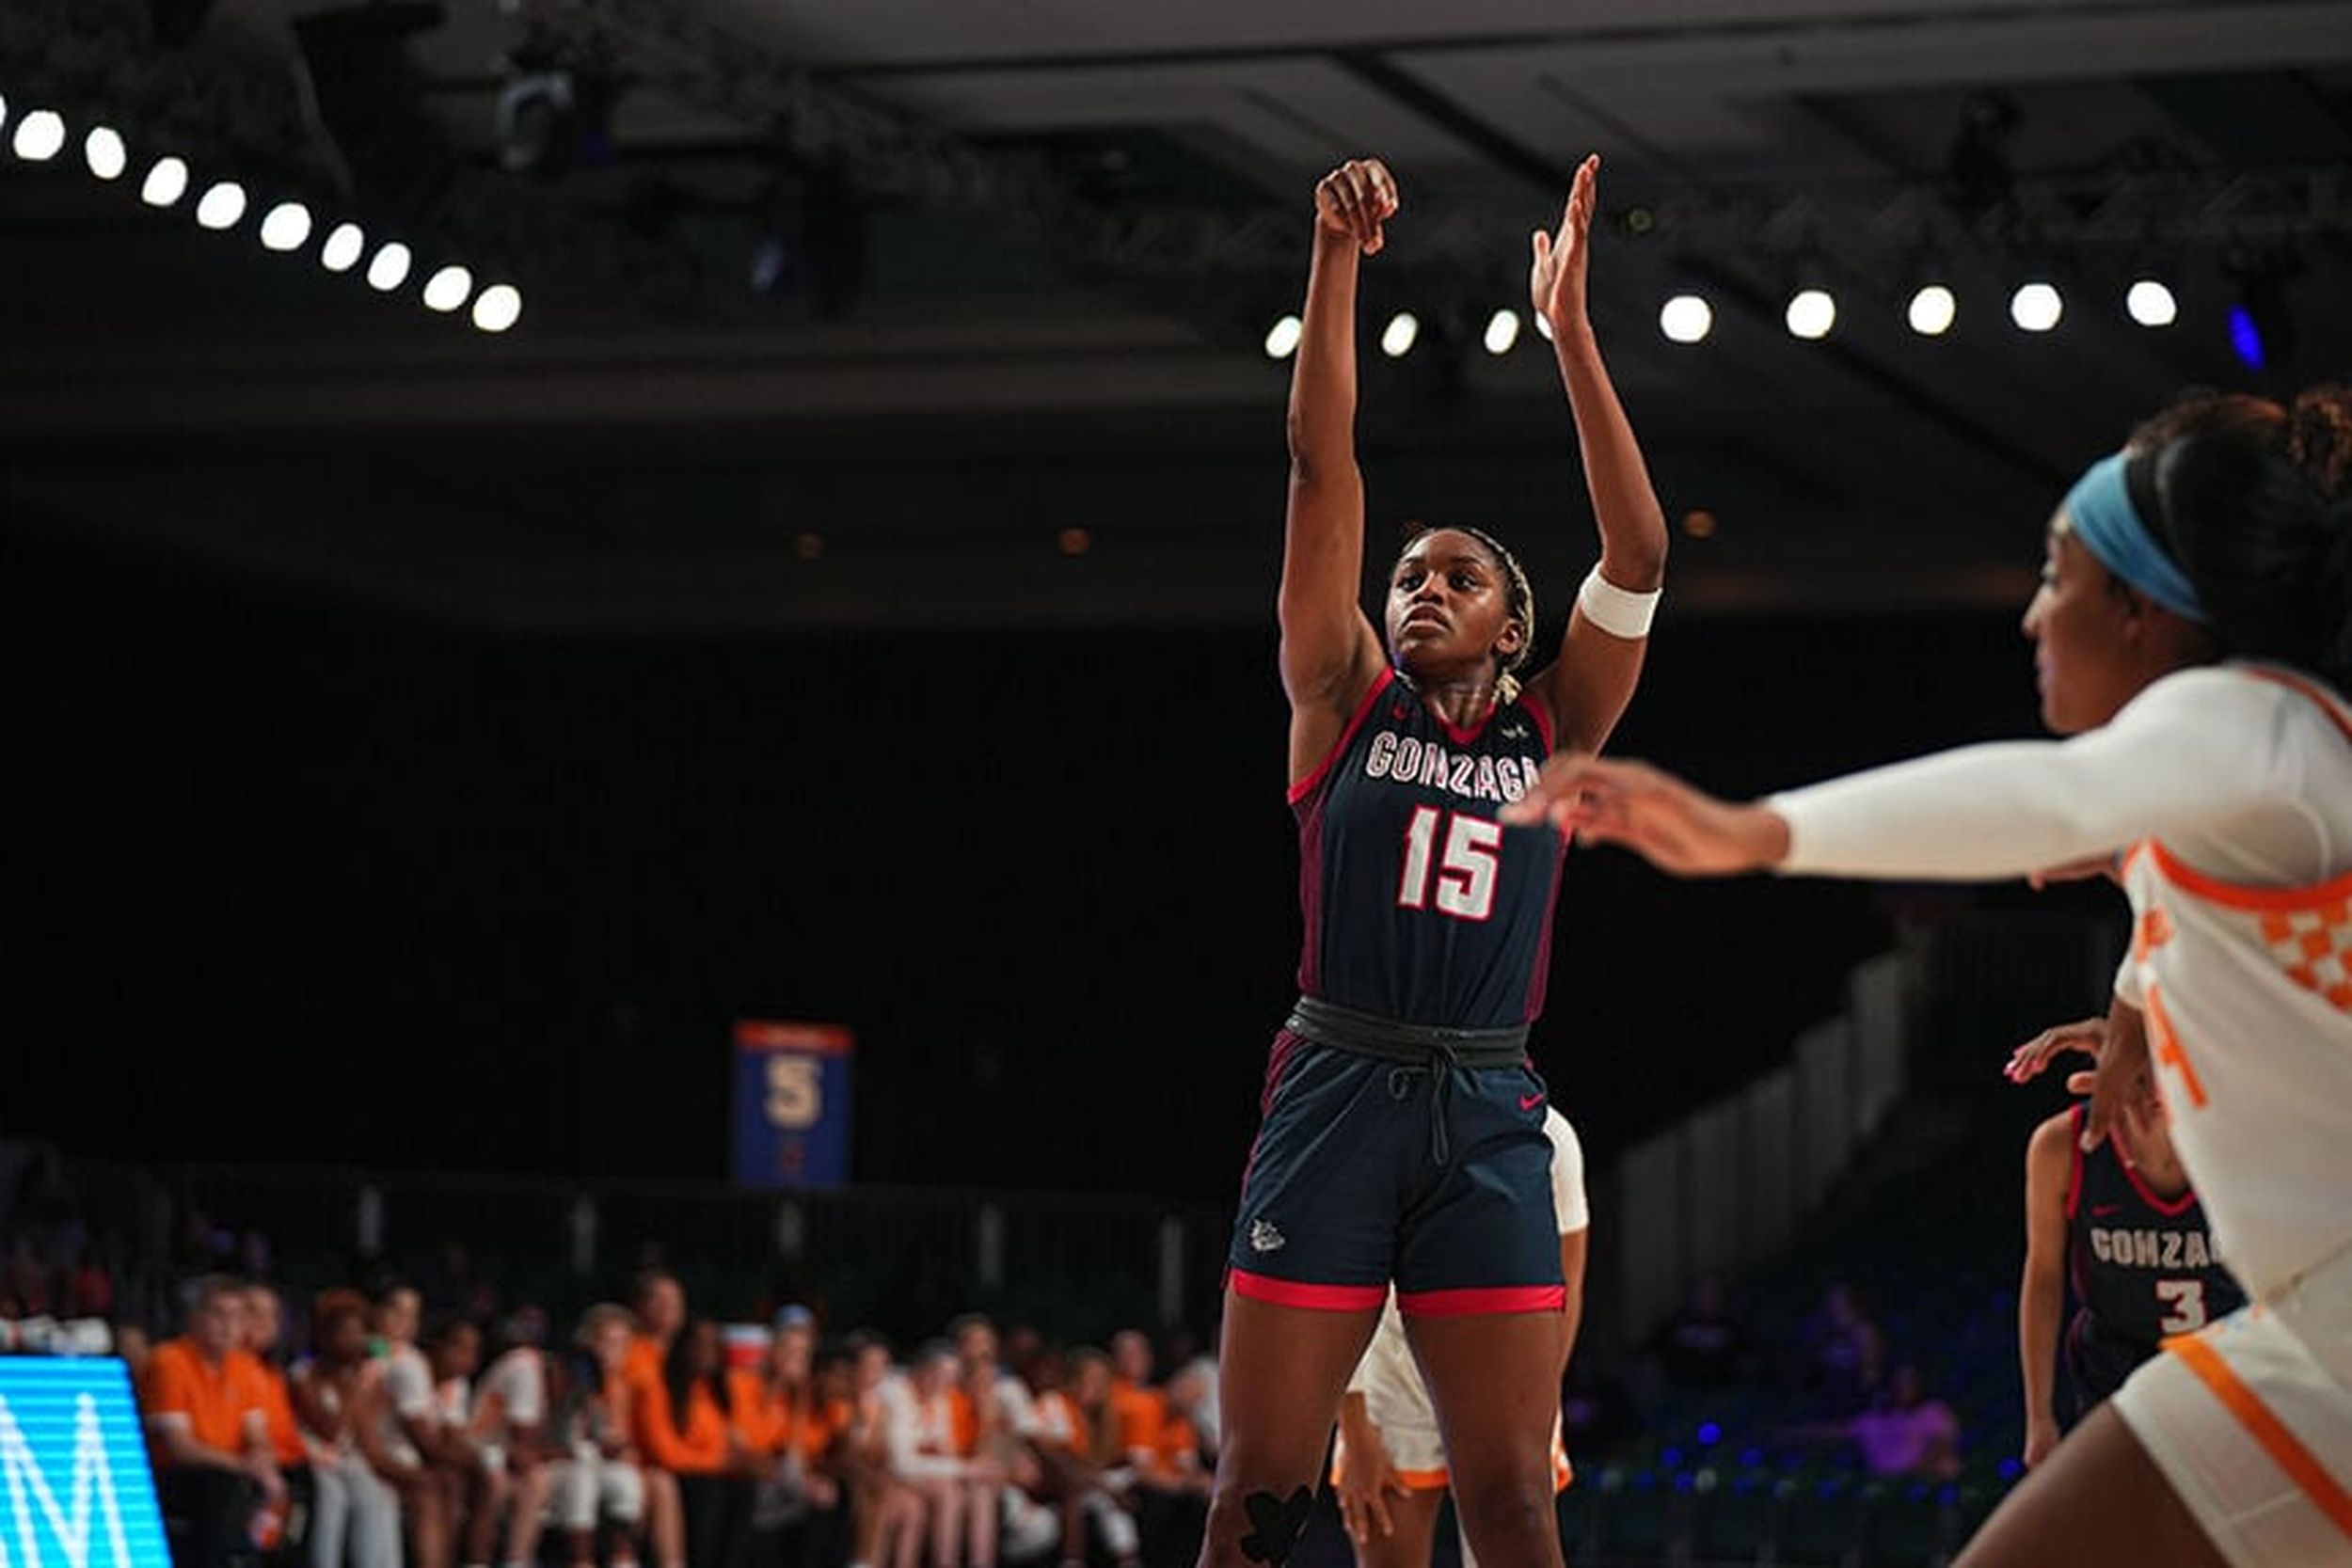 Yvonne Ejim scores late goahead to lift Gonzaga over No. 23 Tennessee